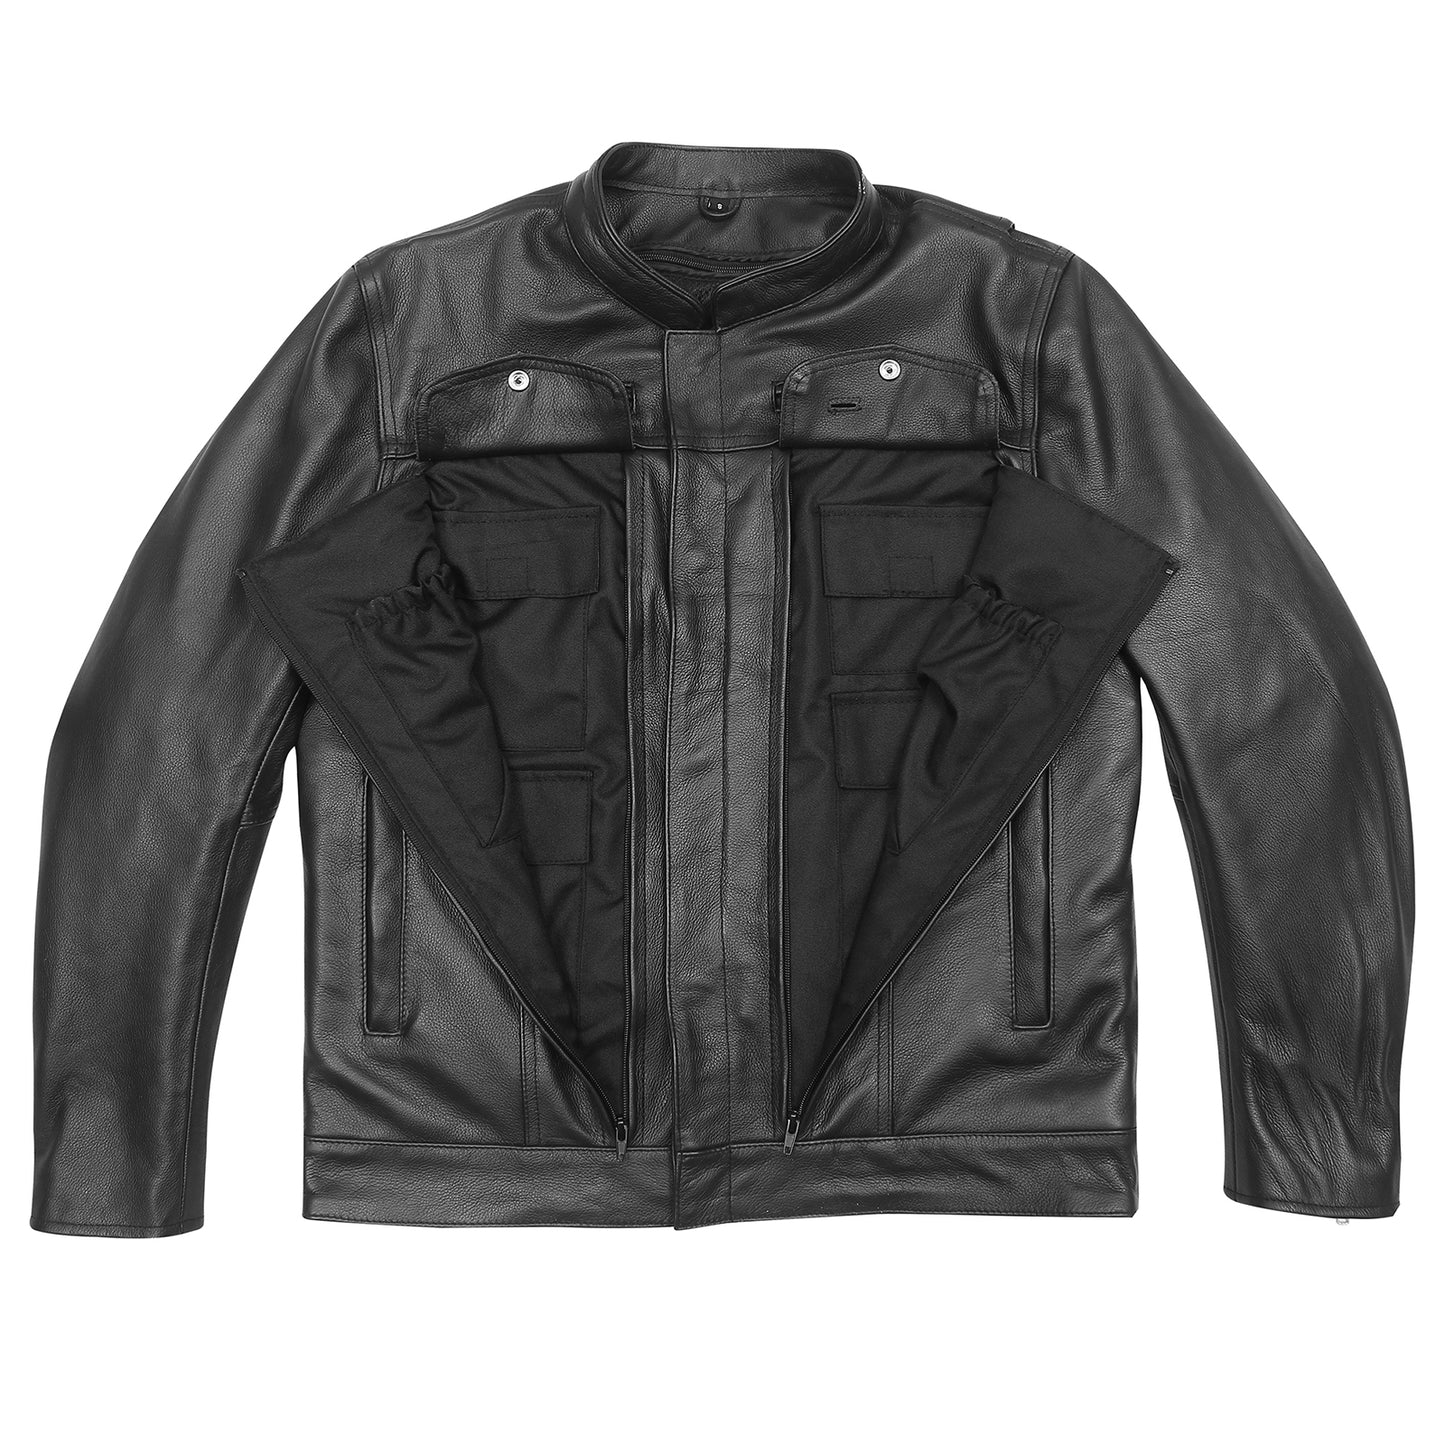 Vance Leathers' Men's Top Performer Motorcycle Leather Jacket with double conceal carry pockets